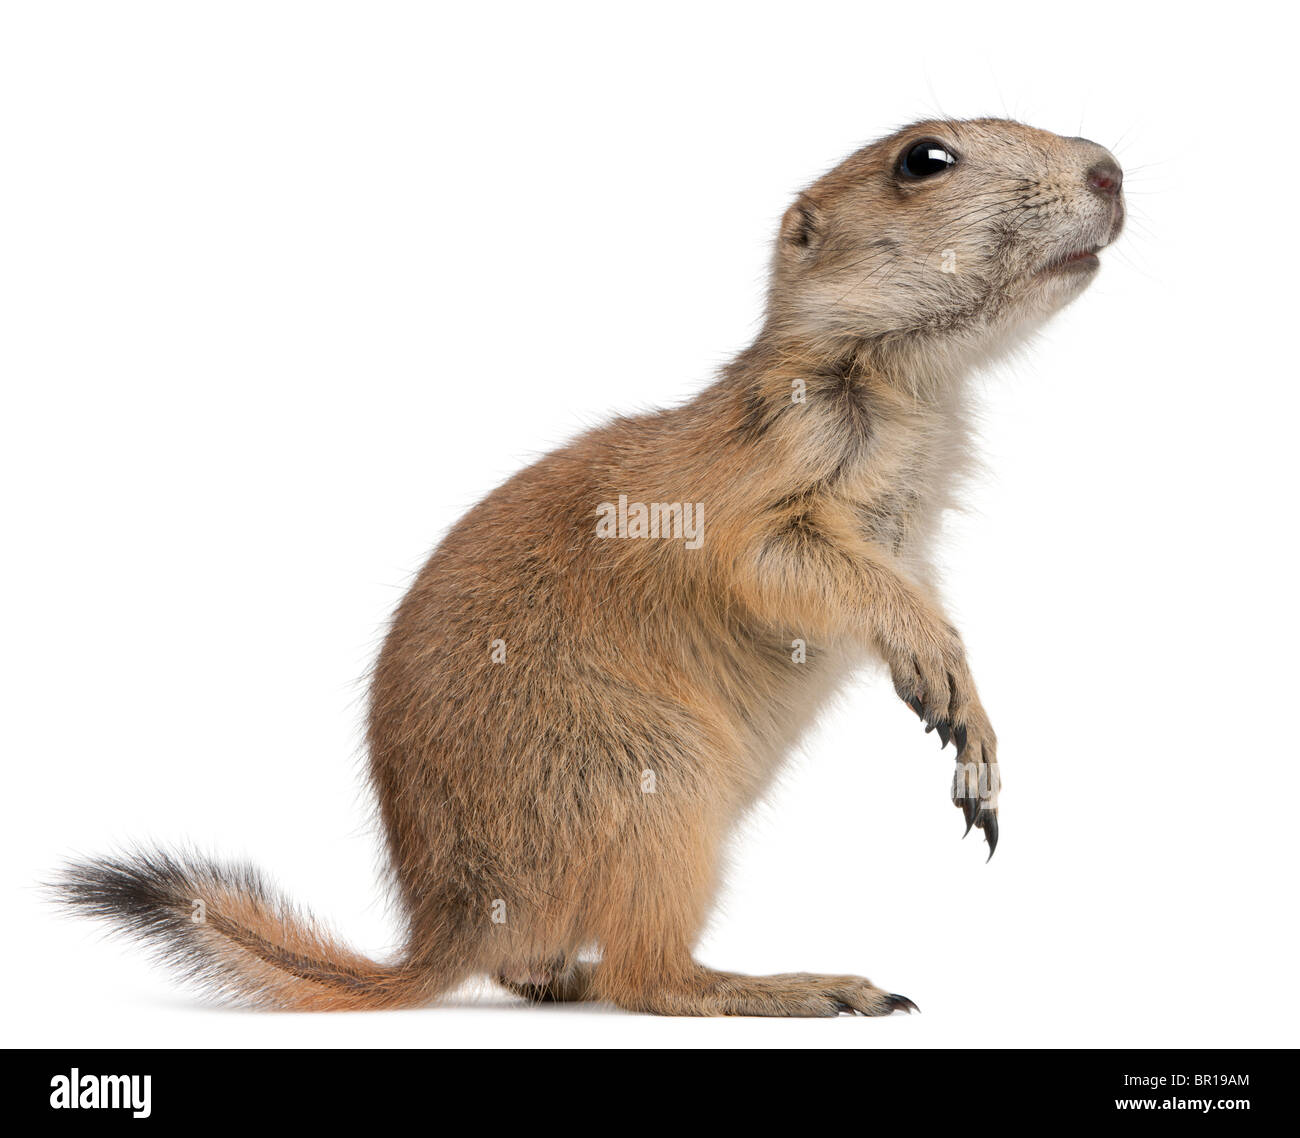 Black-tailed prairie dog, Cynomys ludovicianus, standing in front of white background Stock Photo